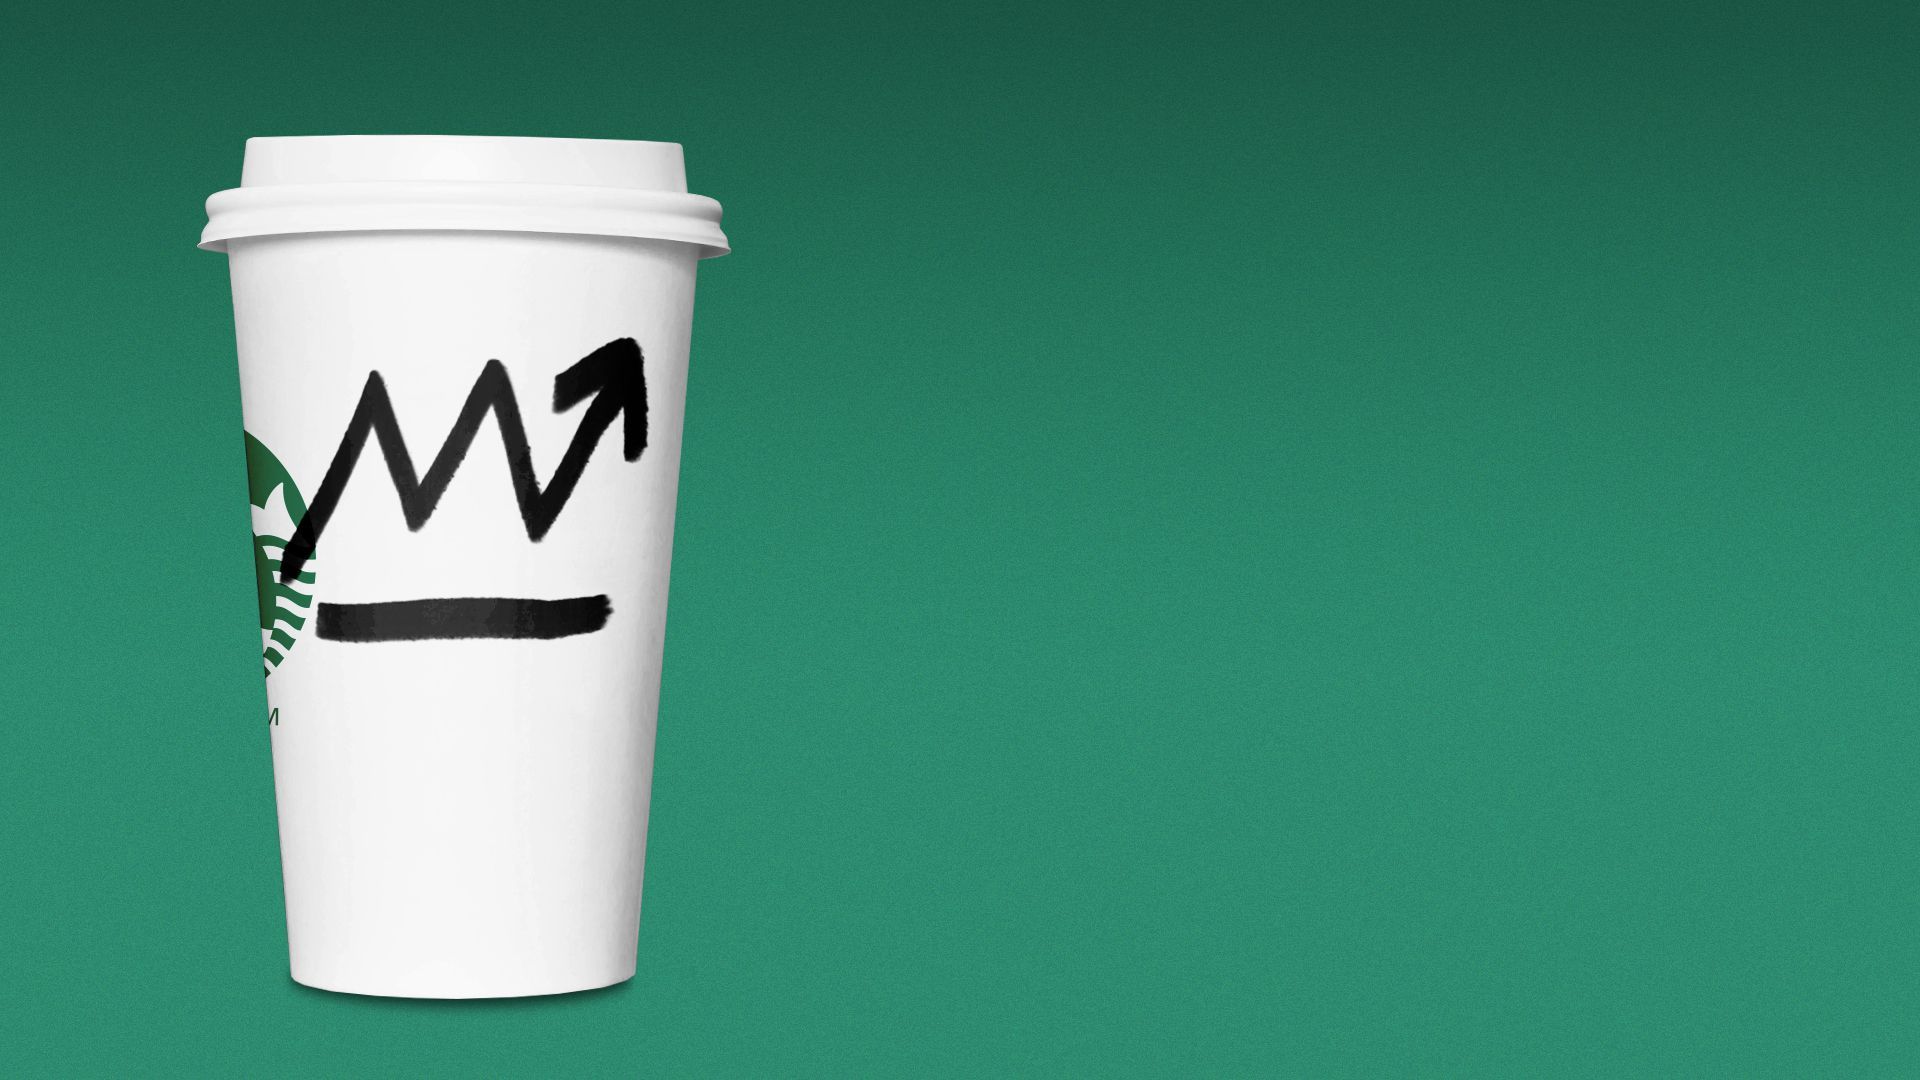 What Exactly Is A Caffè Misto At Starbucks?